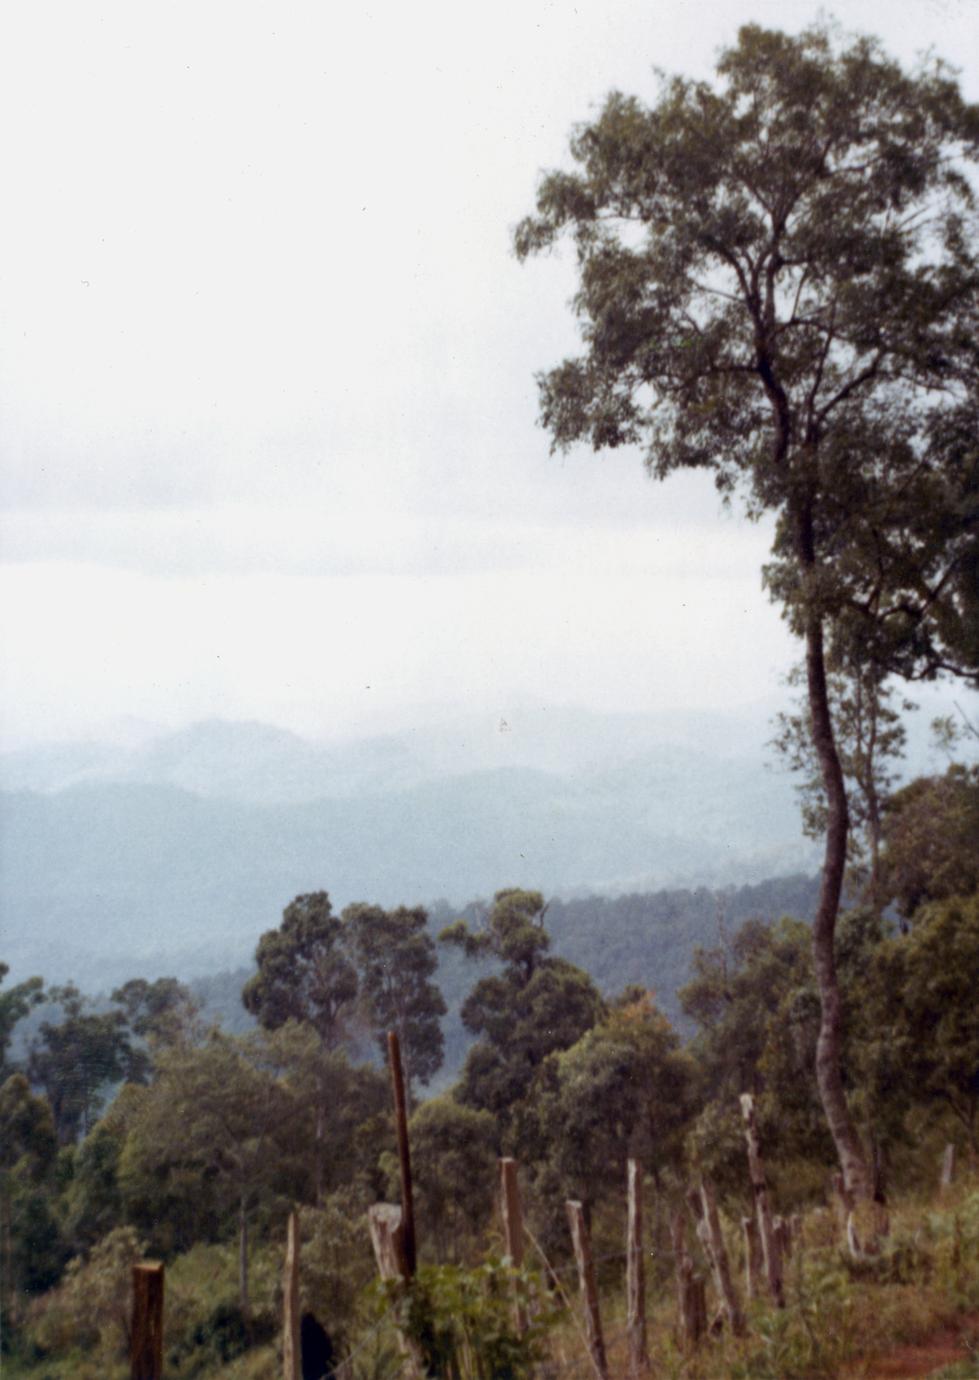 Mountain terrain in the vicinity of a Blue Hmong village in northern Thailand